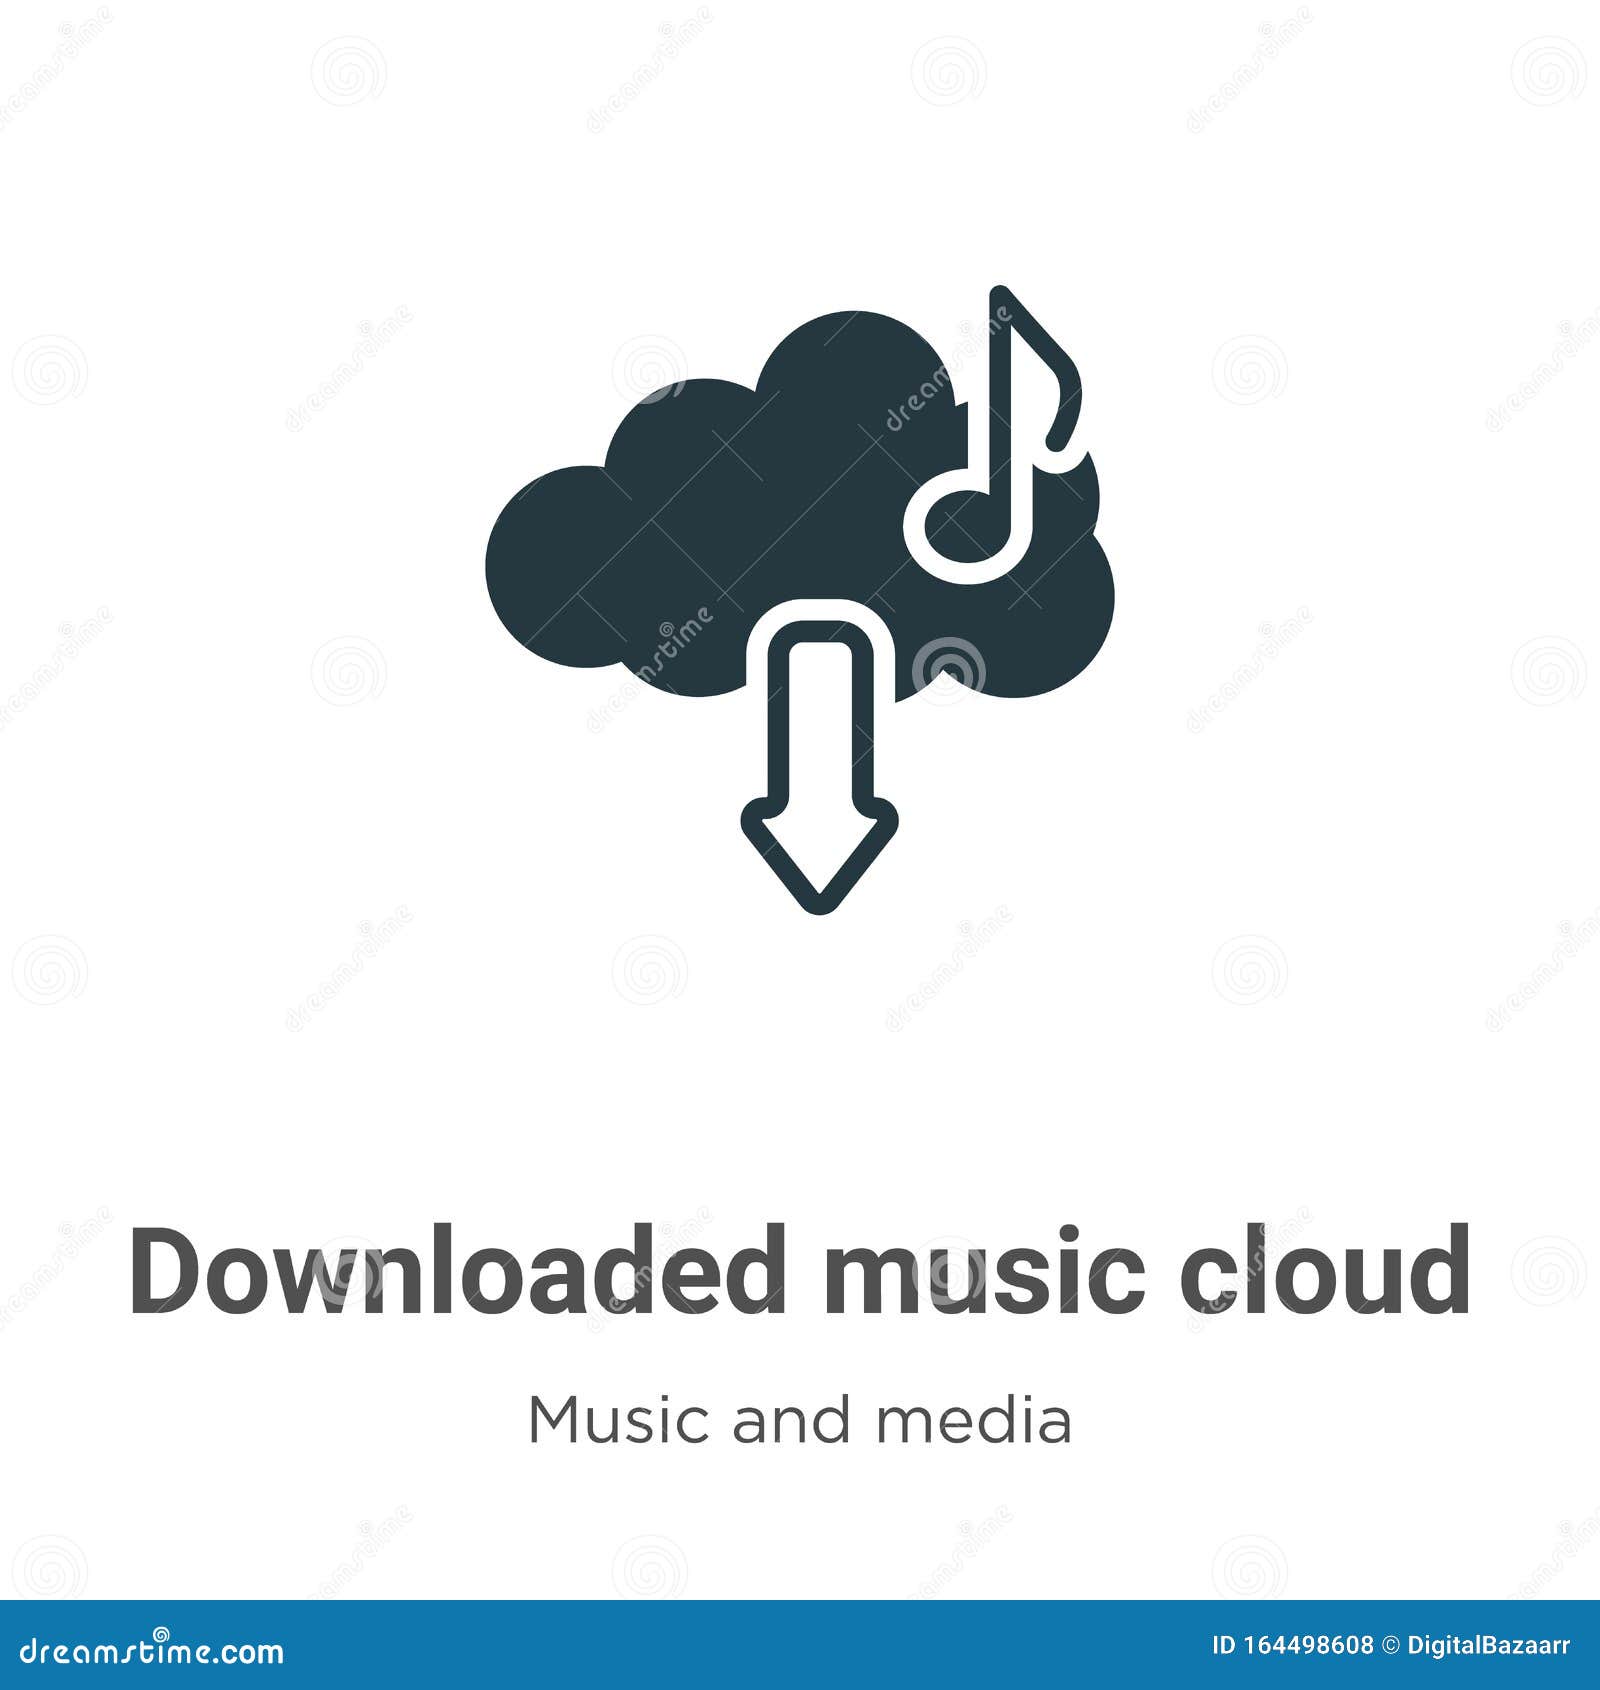 downloaded music cloud  icon on white background. flat  downloaded music cloud icon  sign from modern music and